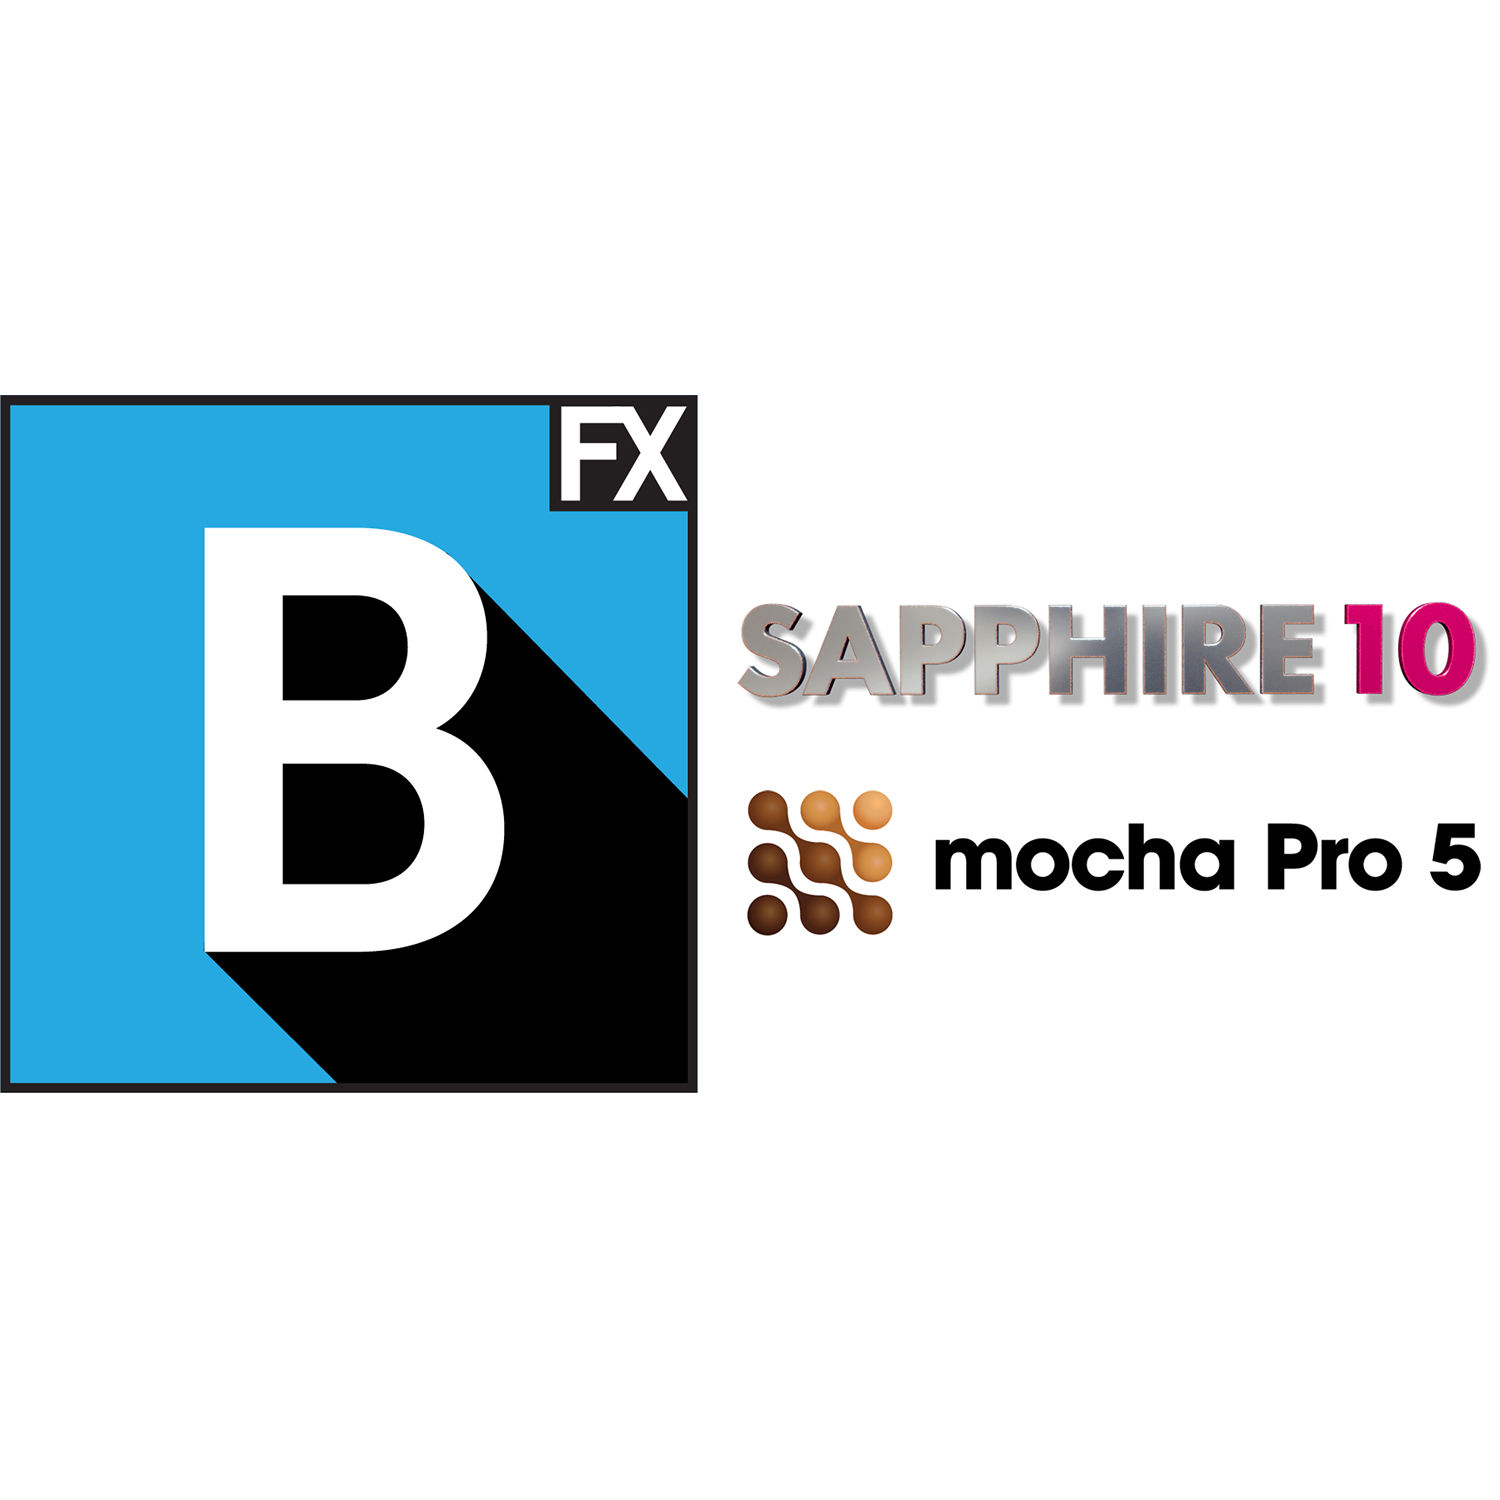 Boris Fx Sapphire 2019 Continuum 2019 Mocha 2019 For Adobe Bundle With 1 Year Of Upgrades And Support Download - free fbx model download boris